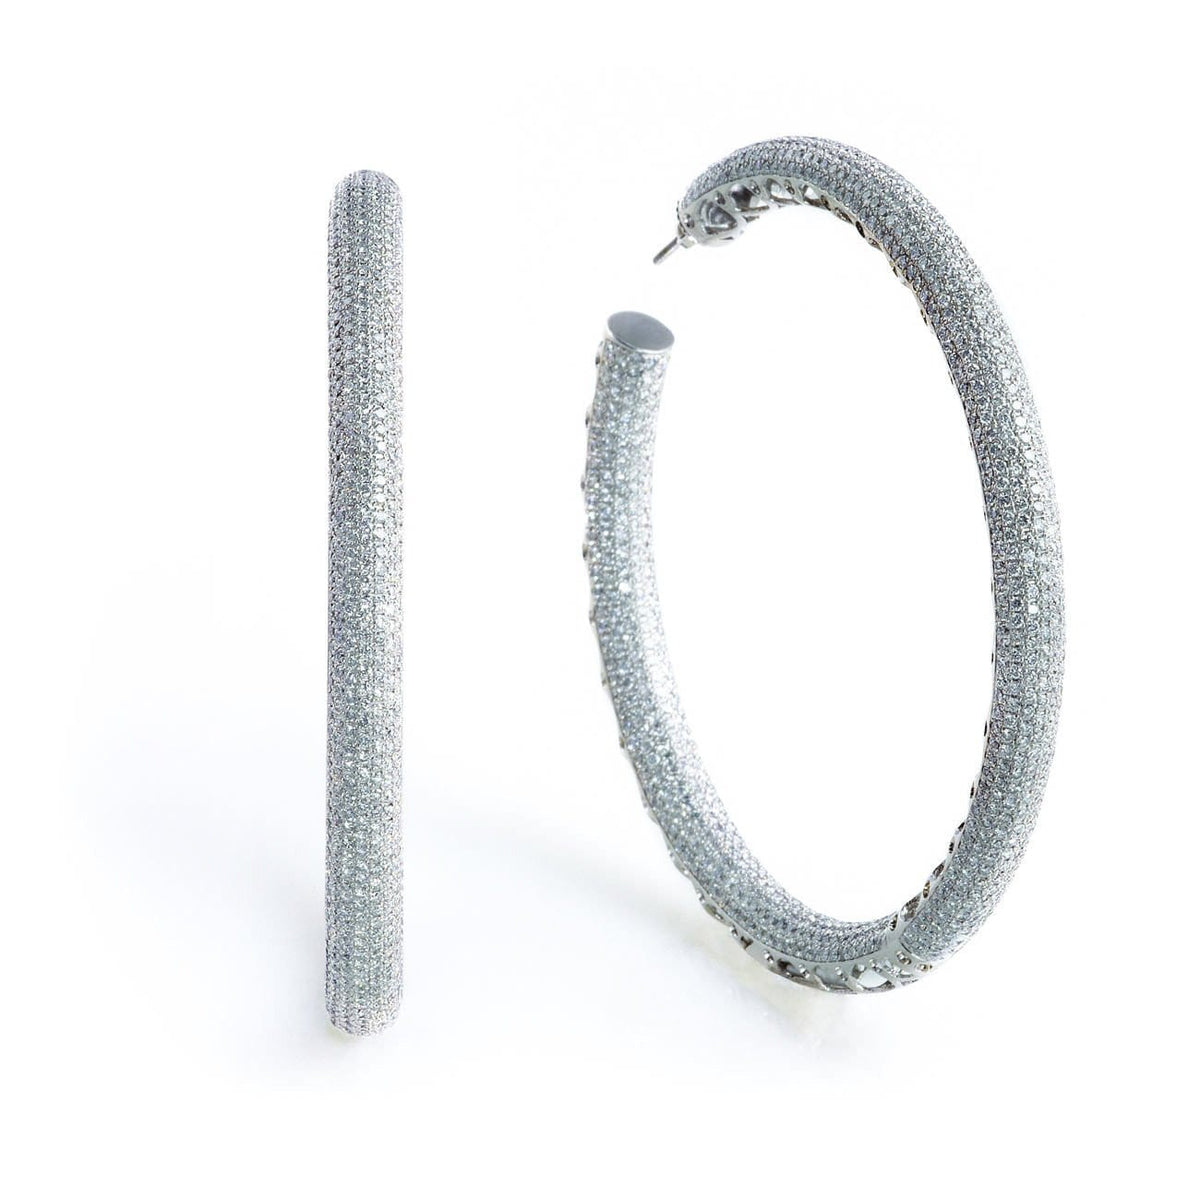 CHRIS AIRE EXTRA LARGE DIAMOND HOOP EARRINGS - STARLET - Chris Aire Fine Jewelry & Timepieces